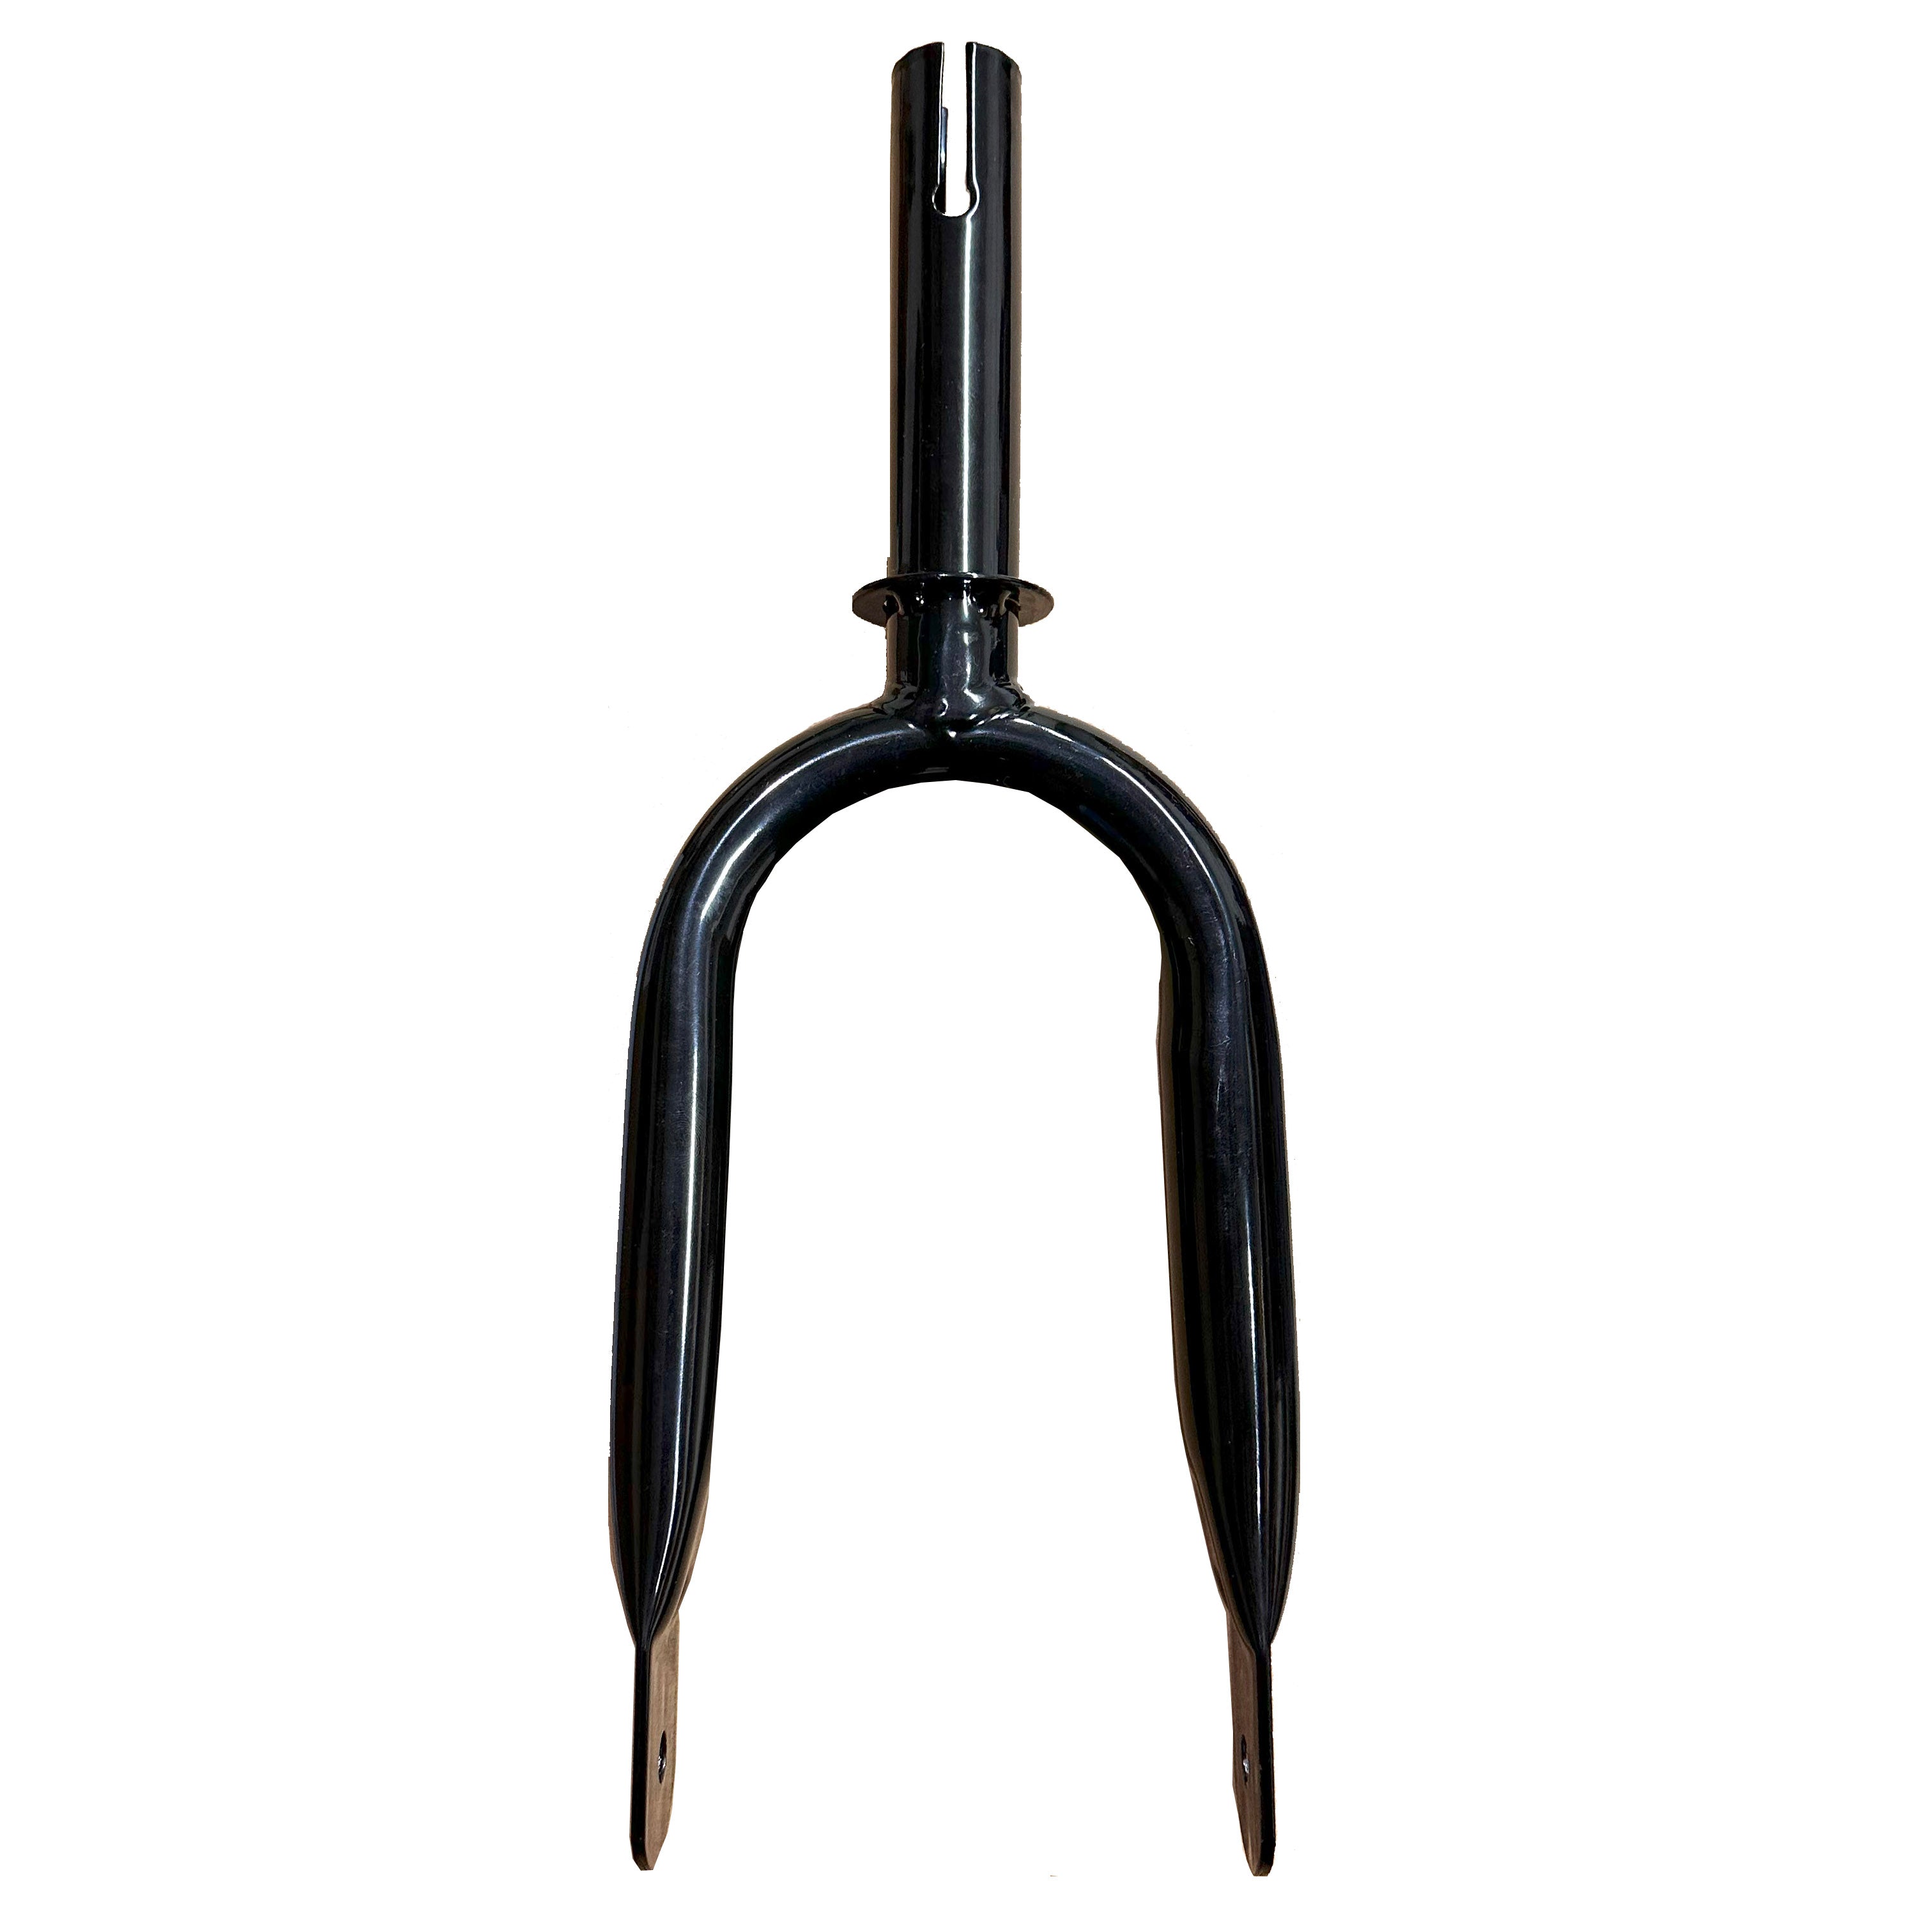 KRIDDO Replacement Front Fork (KB002 only)